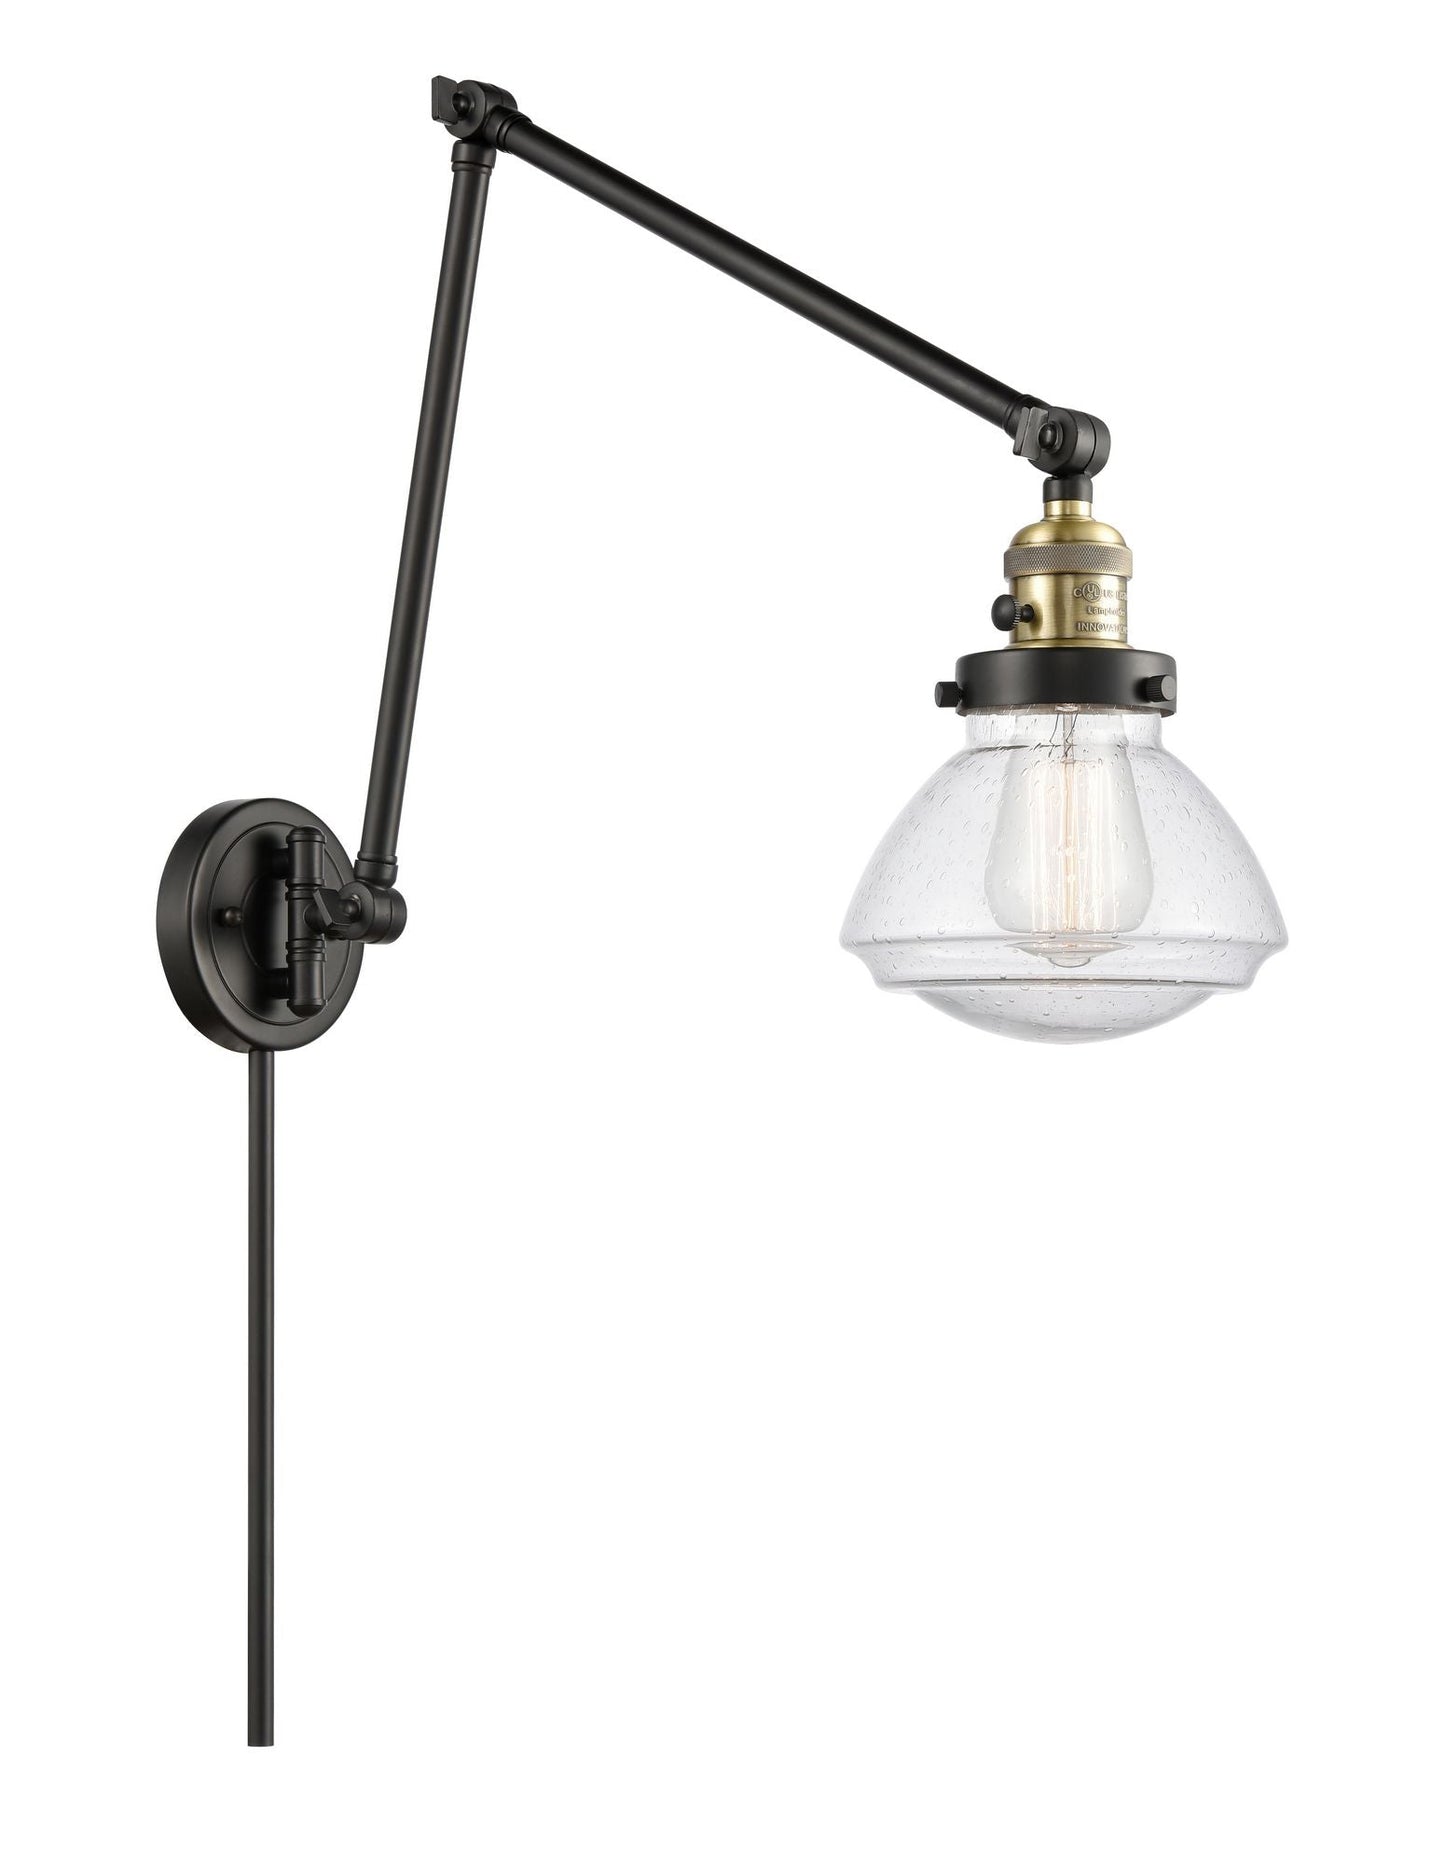 238-BAB-G324 1-Light 8.75" Black Antique Brass Swing Arm - Seedy Olean Glass - LED Bulb - Dimmensions: 8.75 x 28.125 x 27.75 - Glass Up or Down: Yes